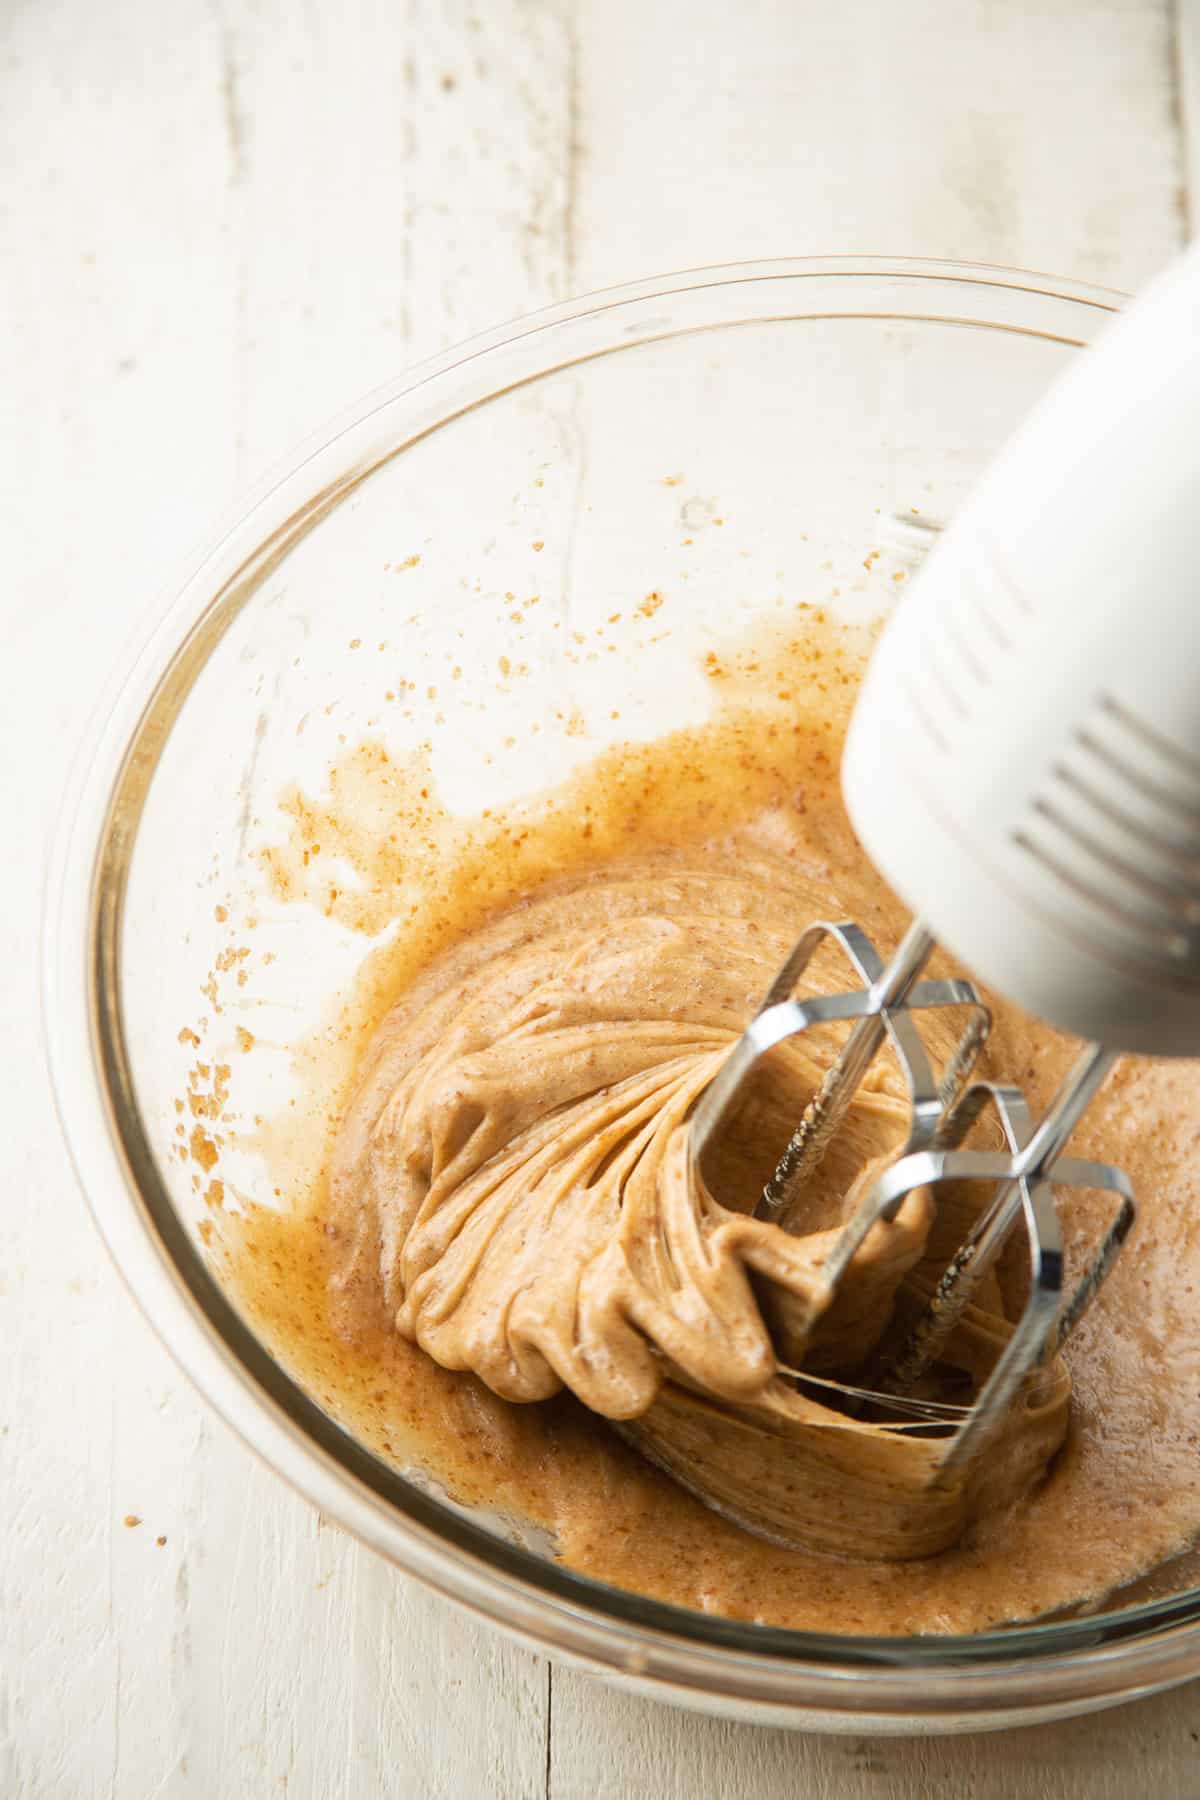 Electric mixer beating flax egg into vegan butter and brown sugar.